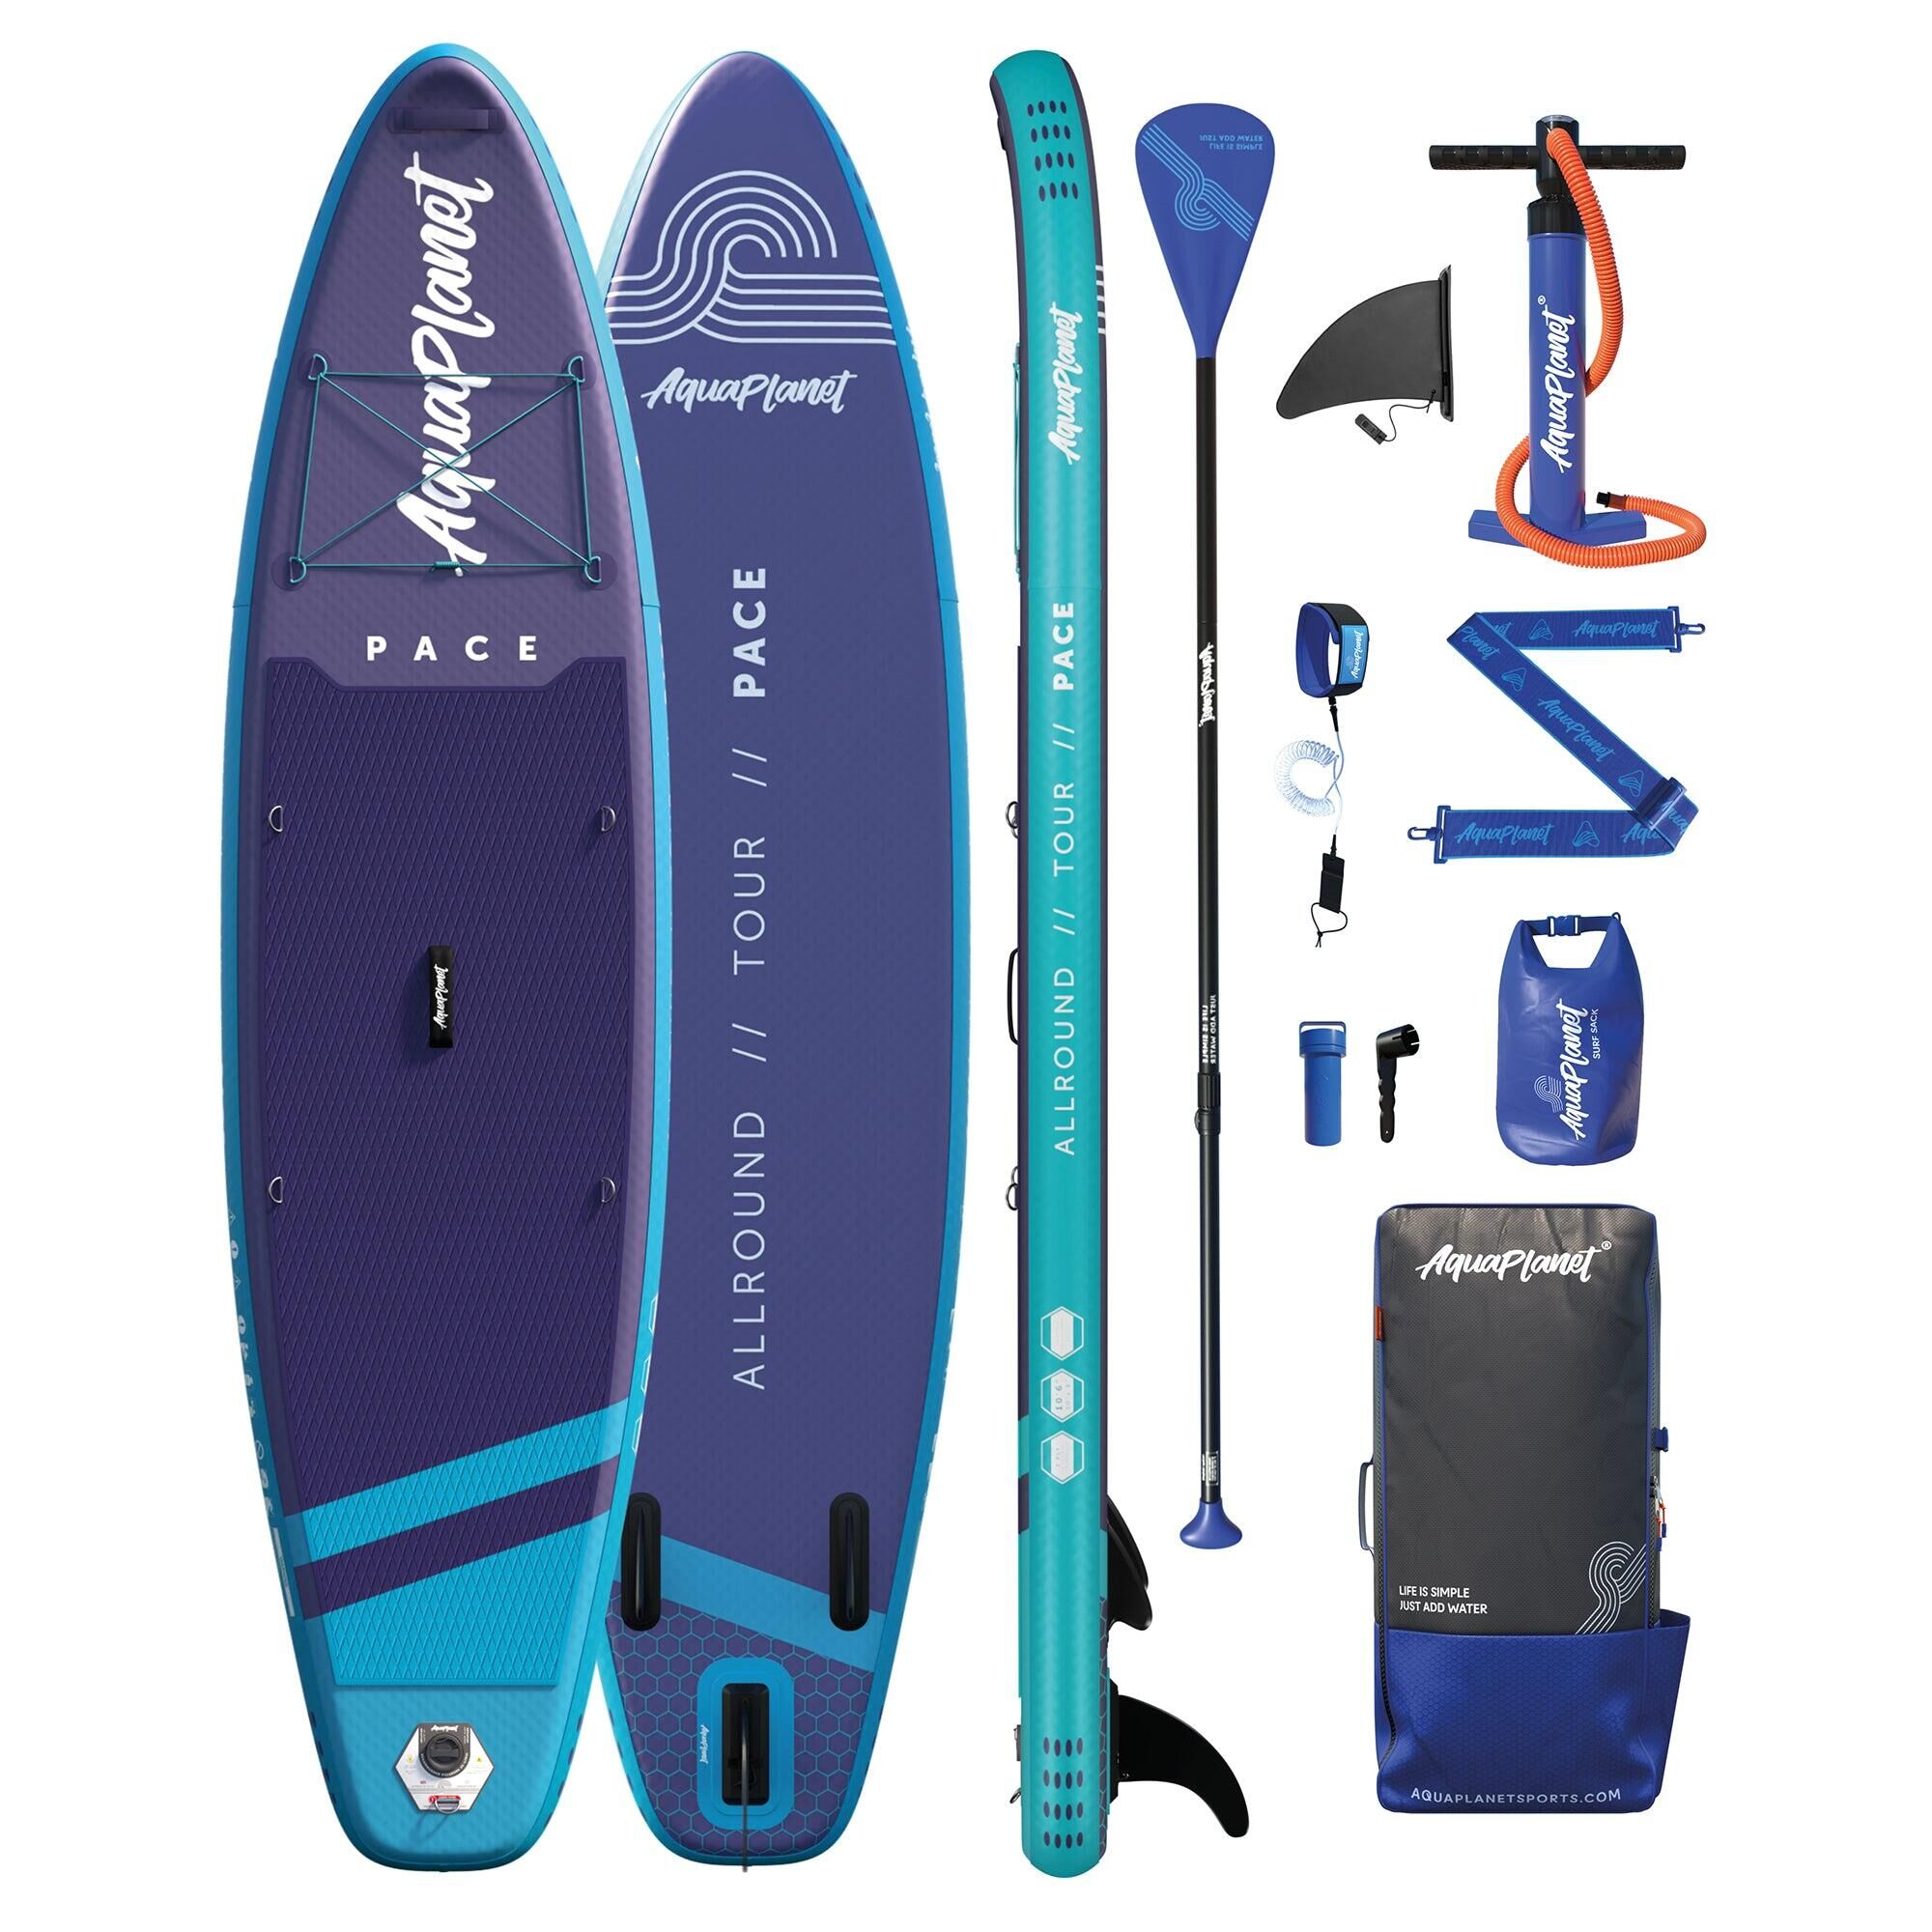 AQUAPLANET Aquaplanet PACE 10'6 Inflatable Stand Up Paddle Board Package - Teal/Midnight